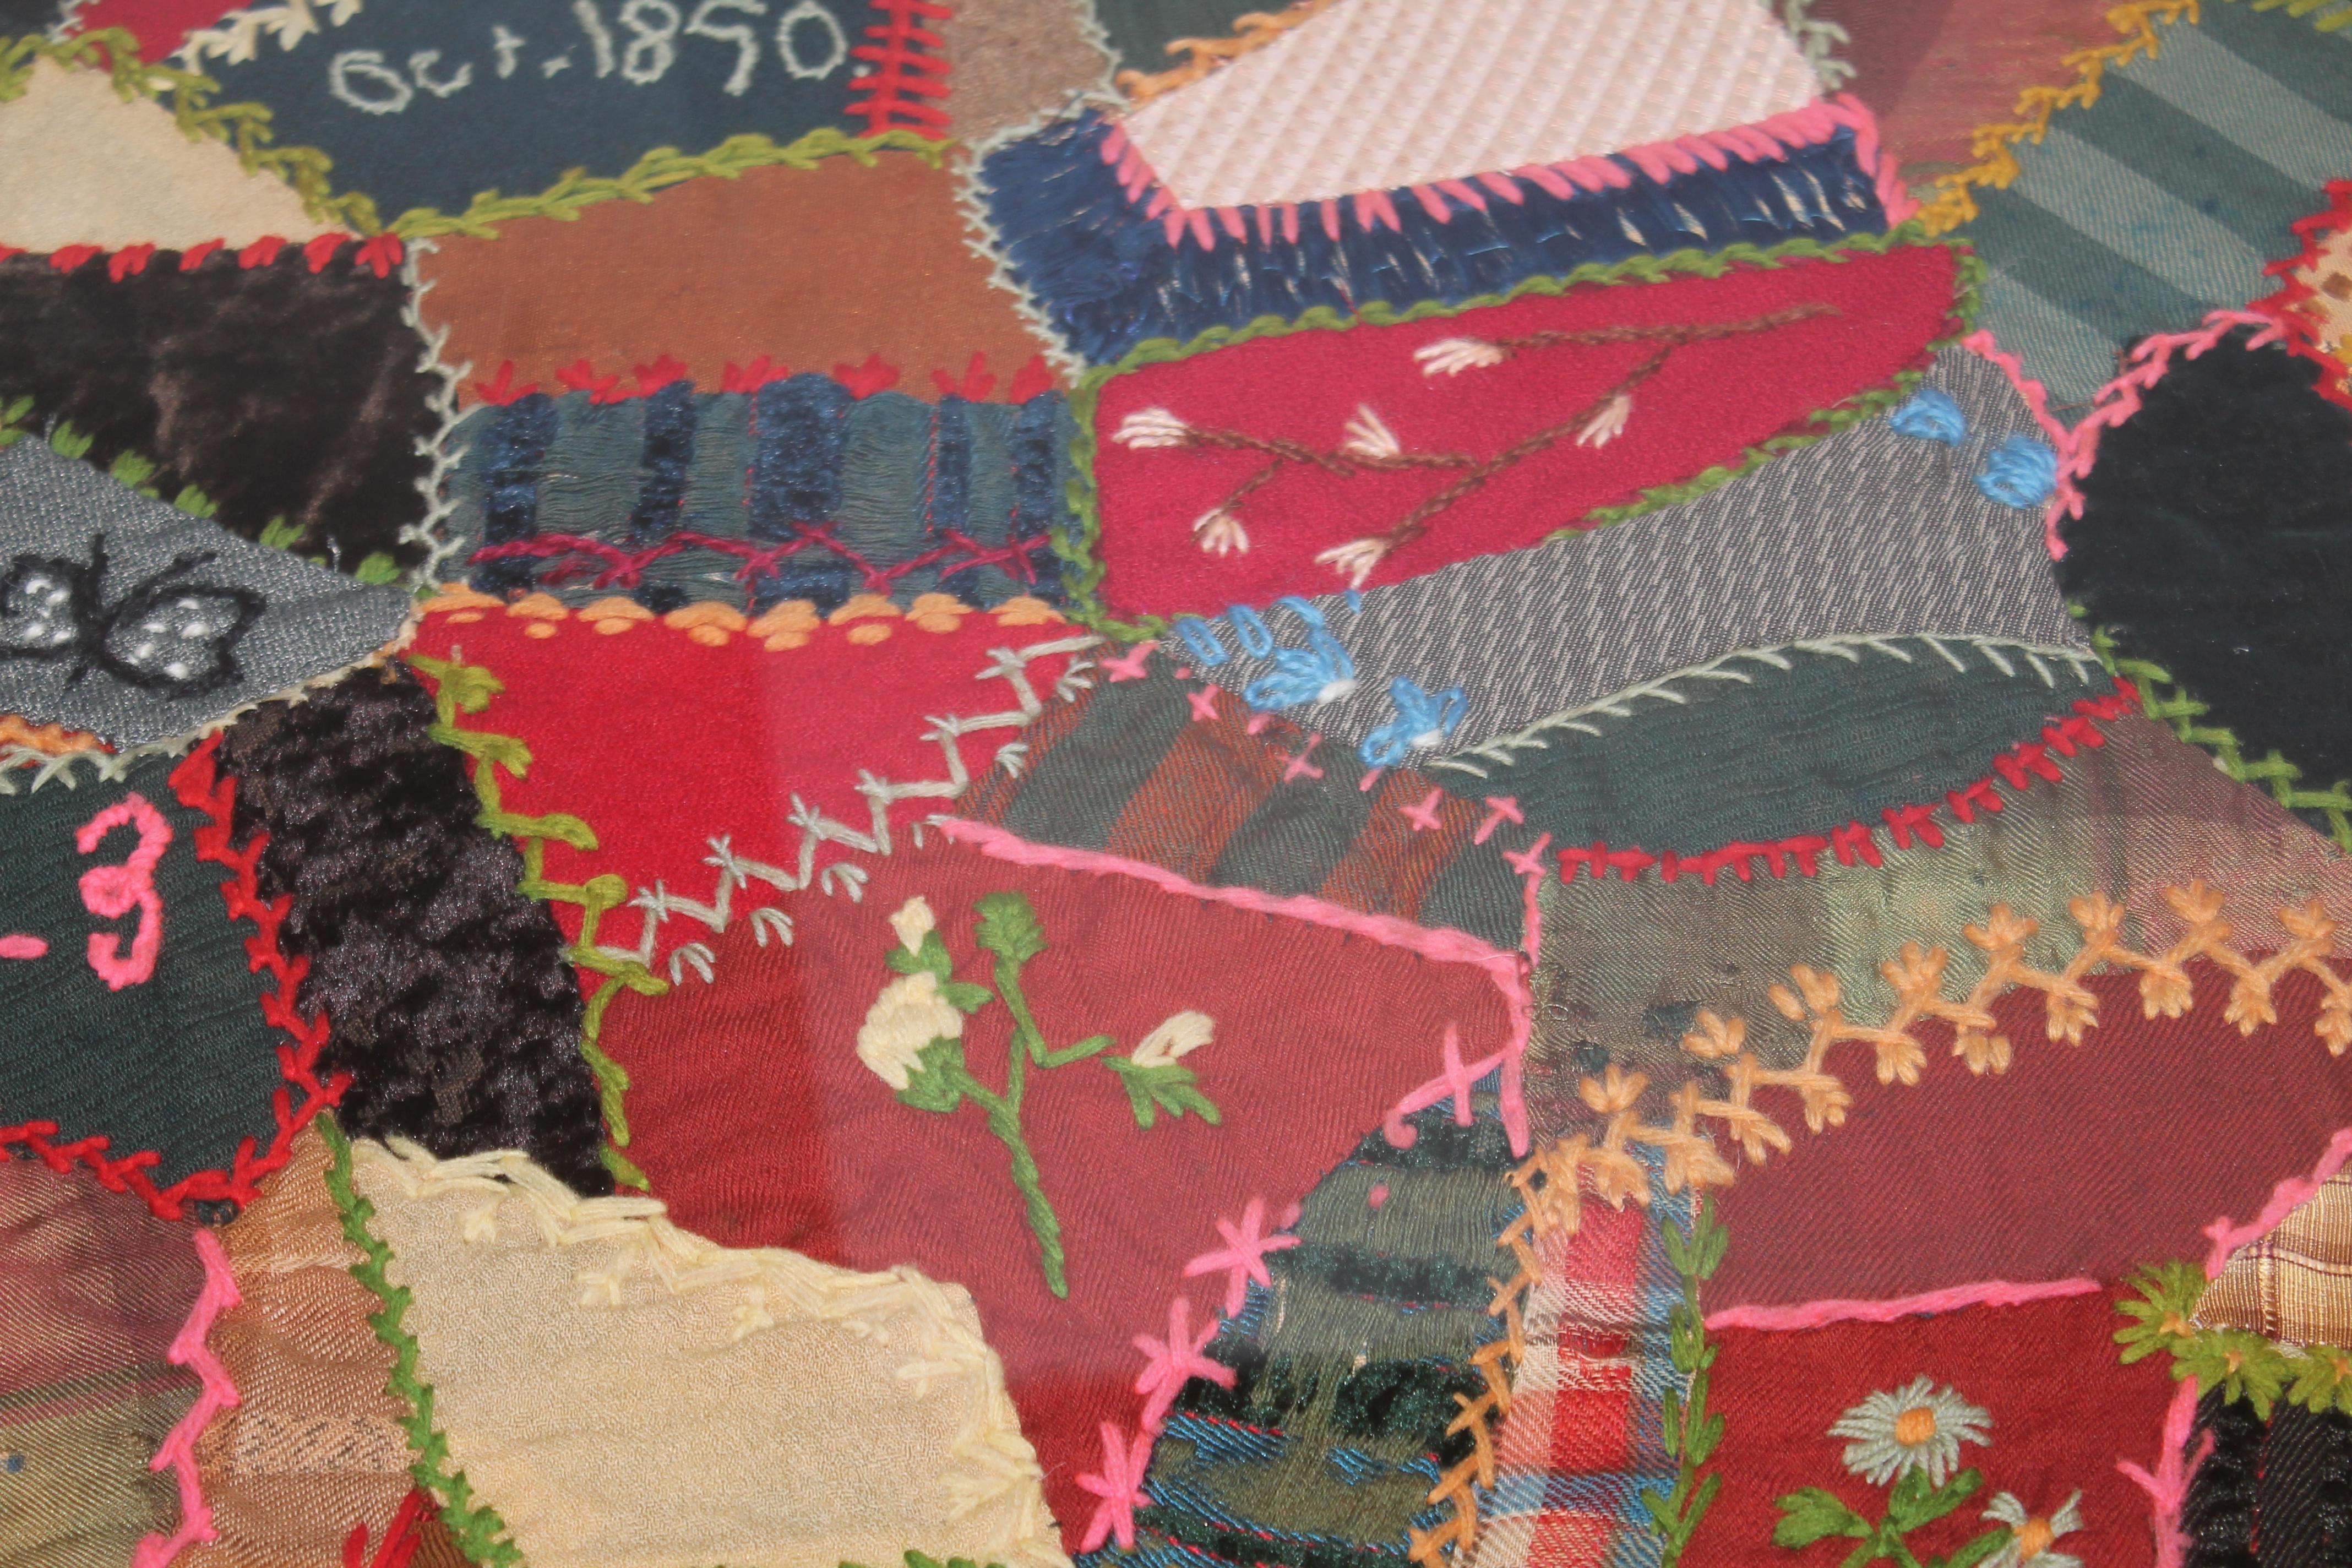 19thc velvet crazy quilt dated 1890 from Pennsylvania in pristine condition. This fine pictorial & embroidered crib quilt is quite the collectors quilt.